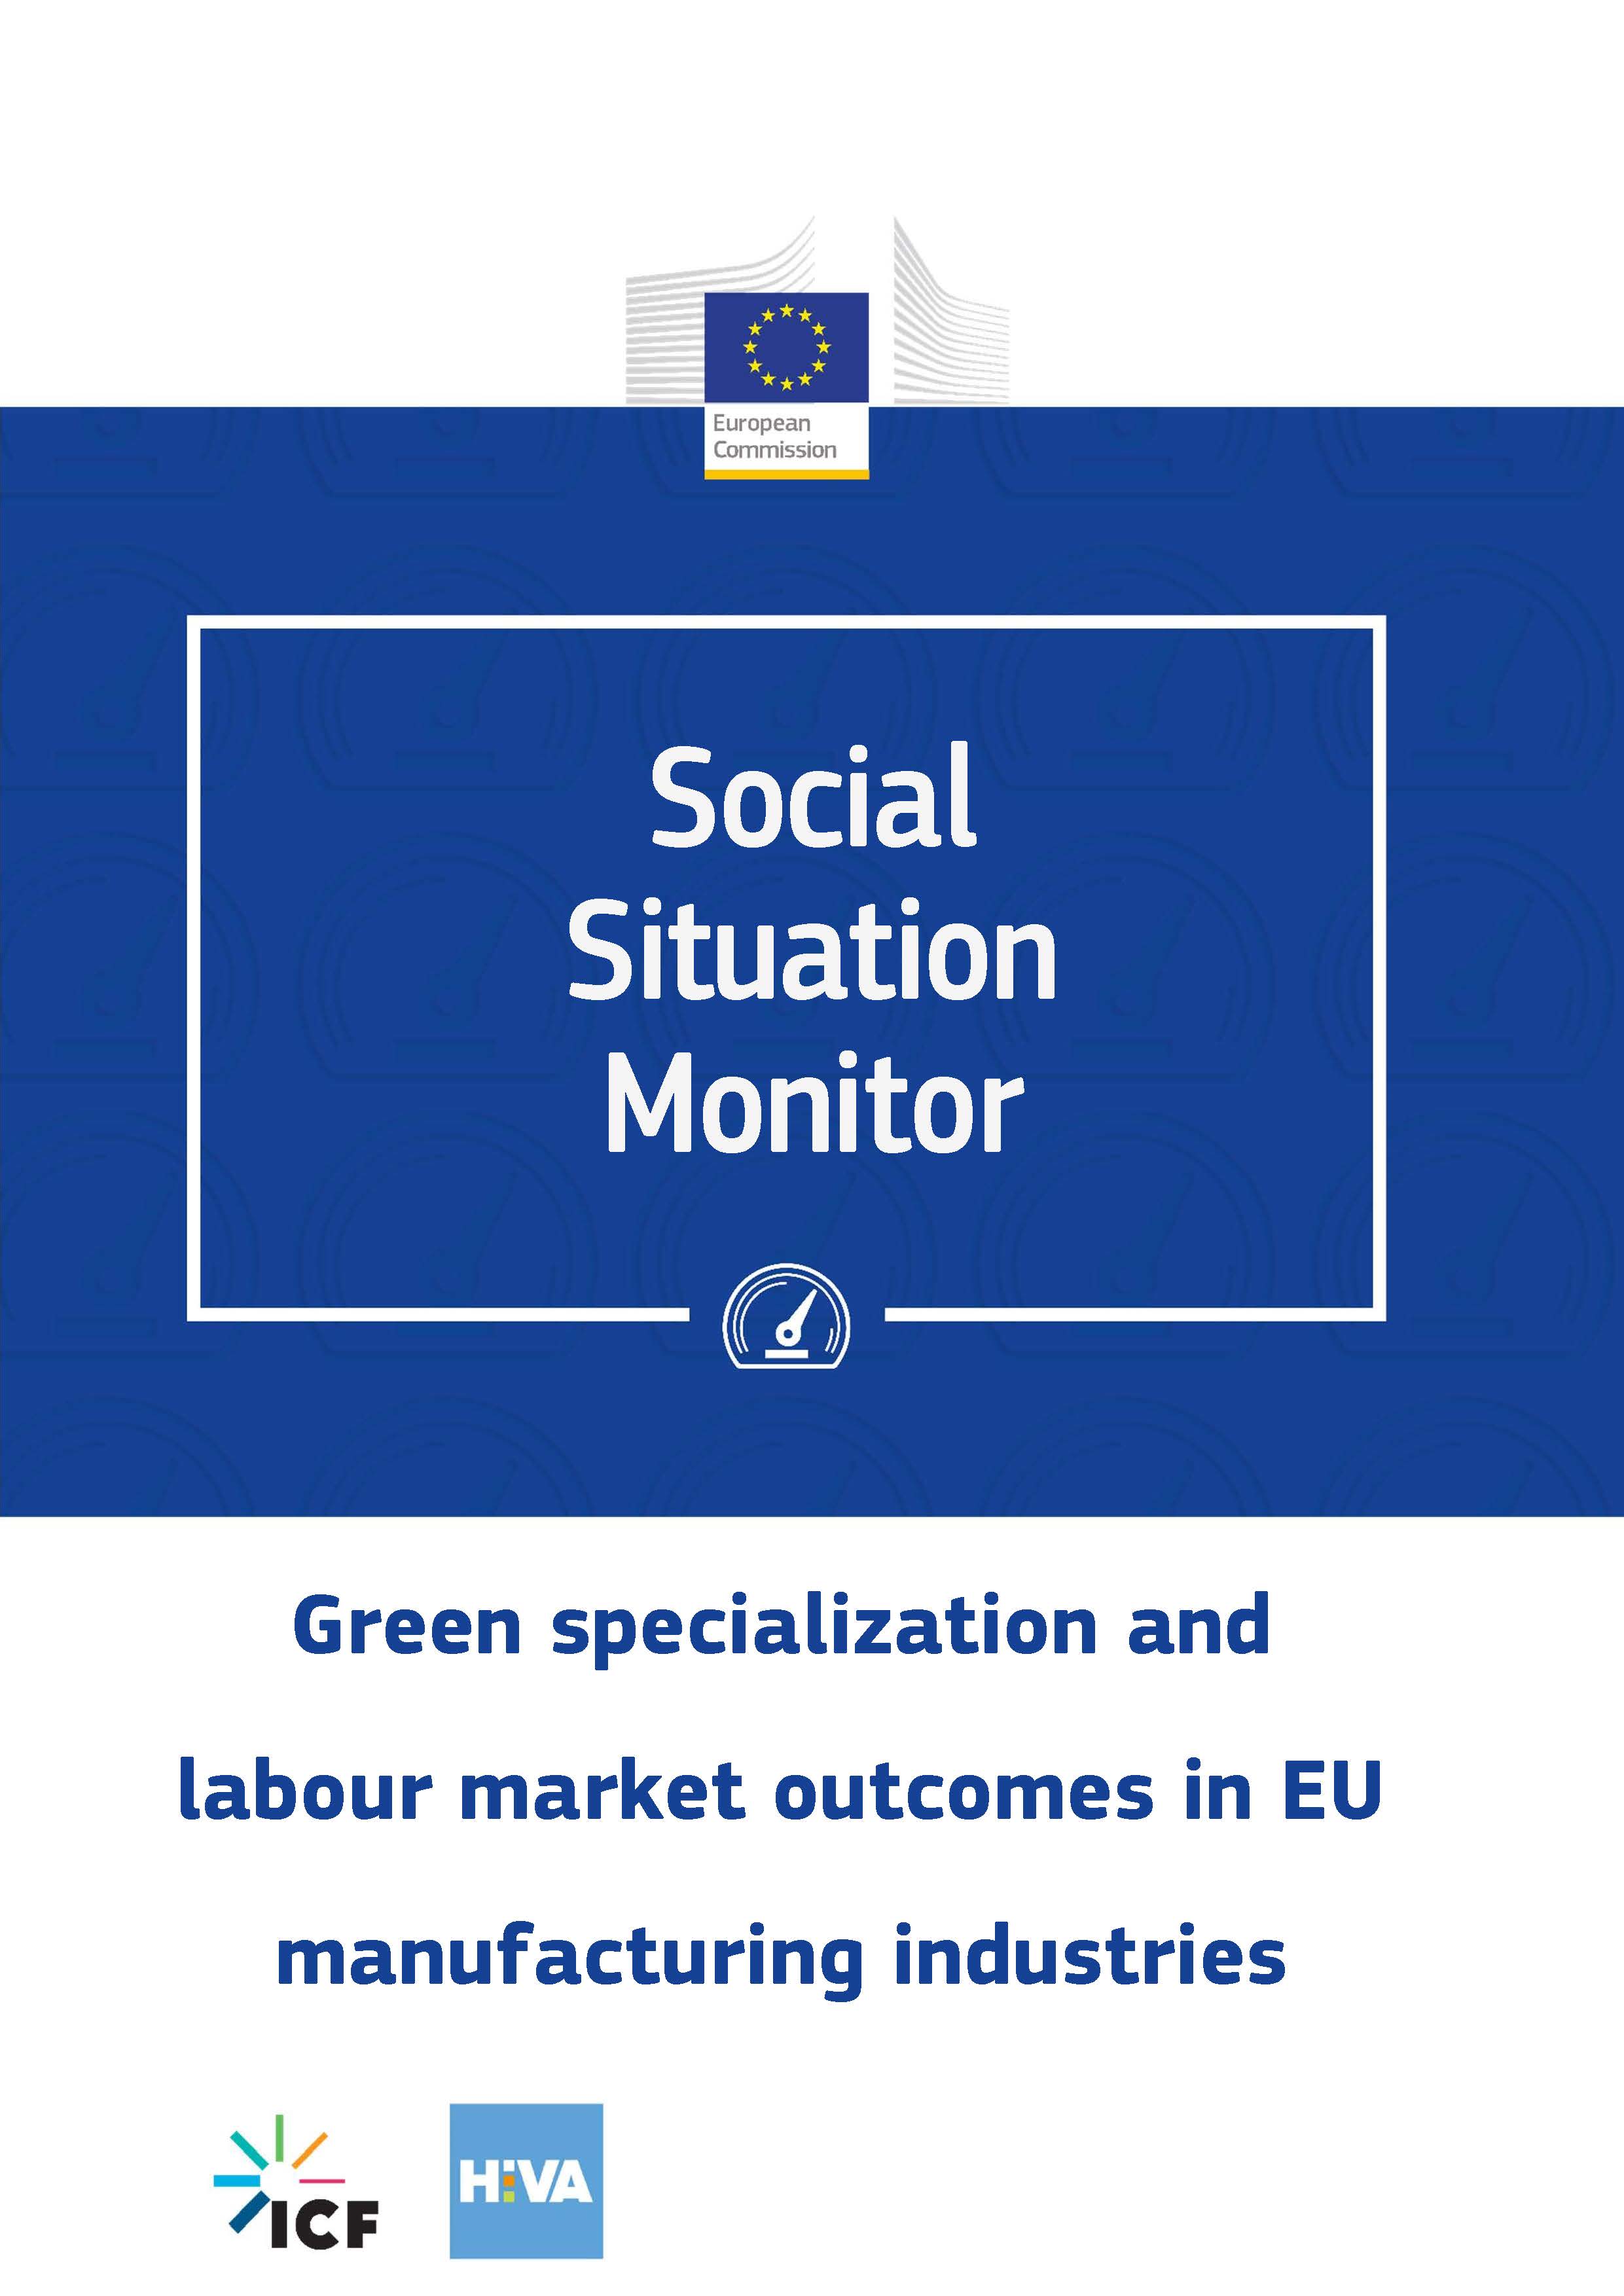 Green specialization and labour market outcomes in EU manufacturing industries